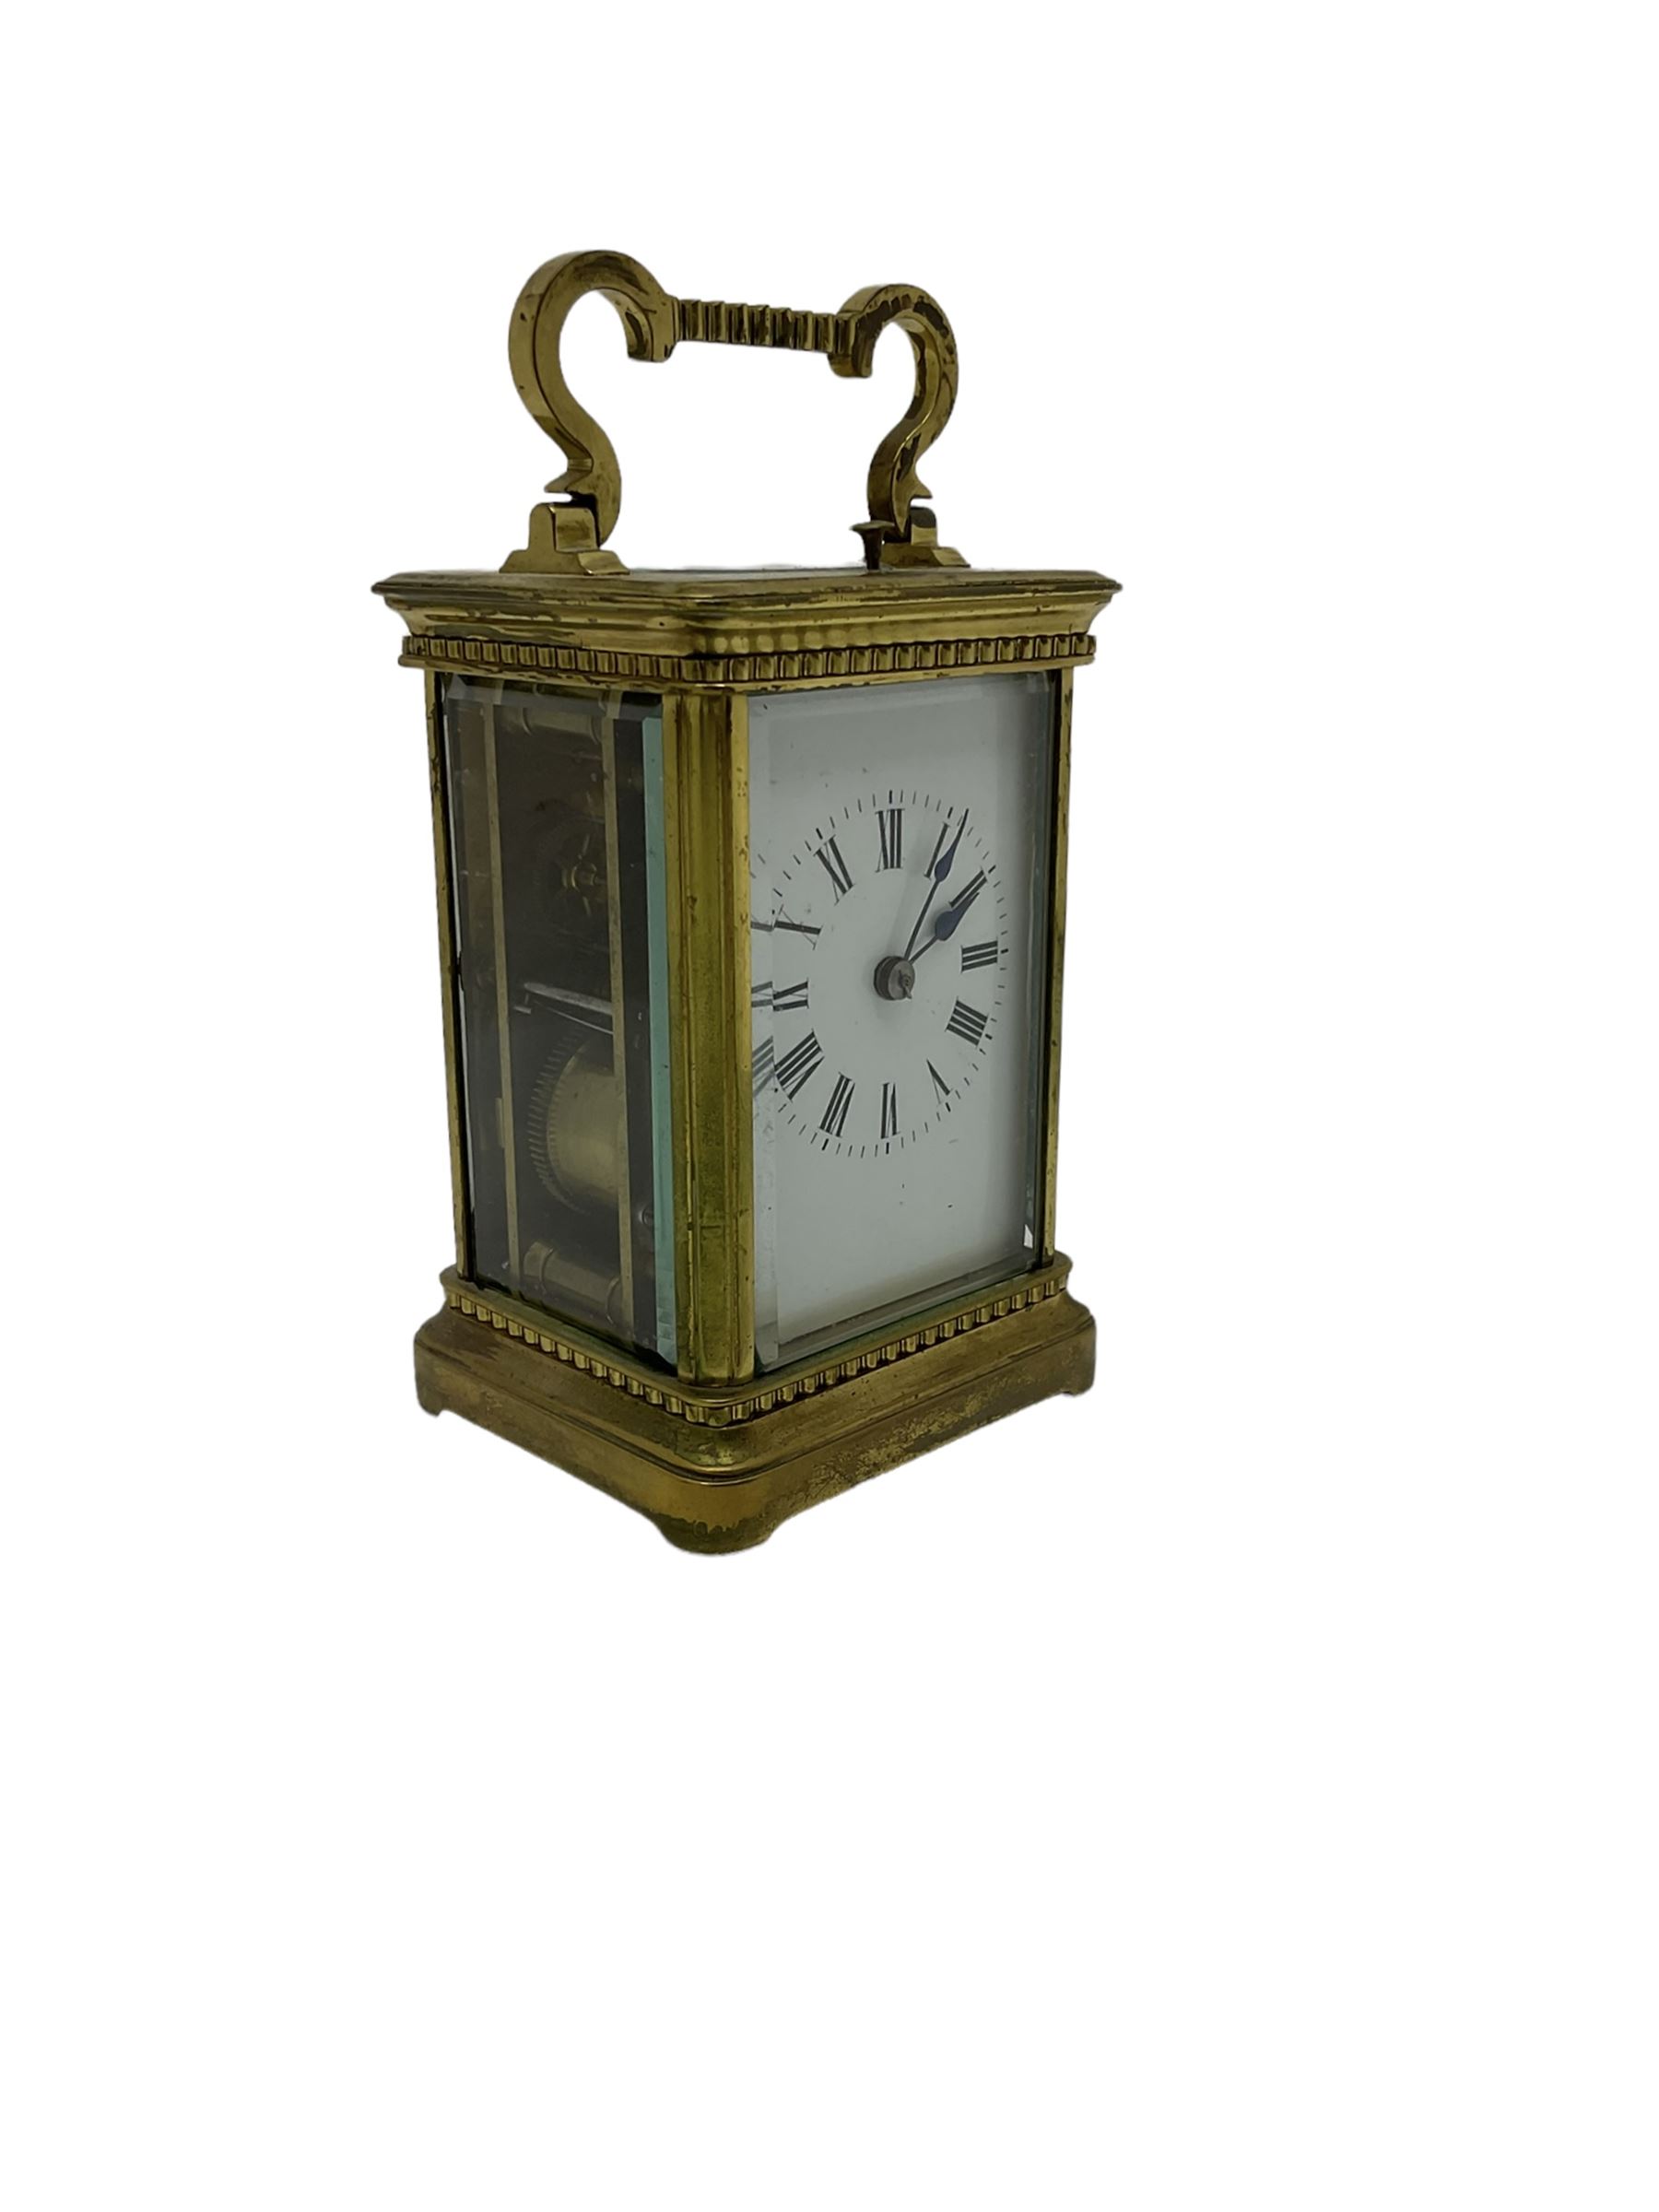 French carriage clock c1910 with strike and repeat work in a corniche case with beadwork - Image 4 of 6